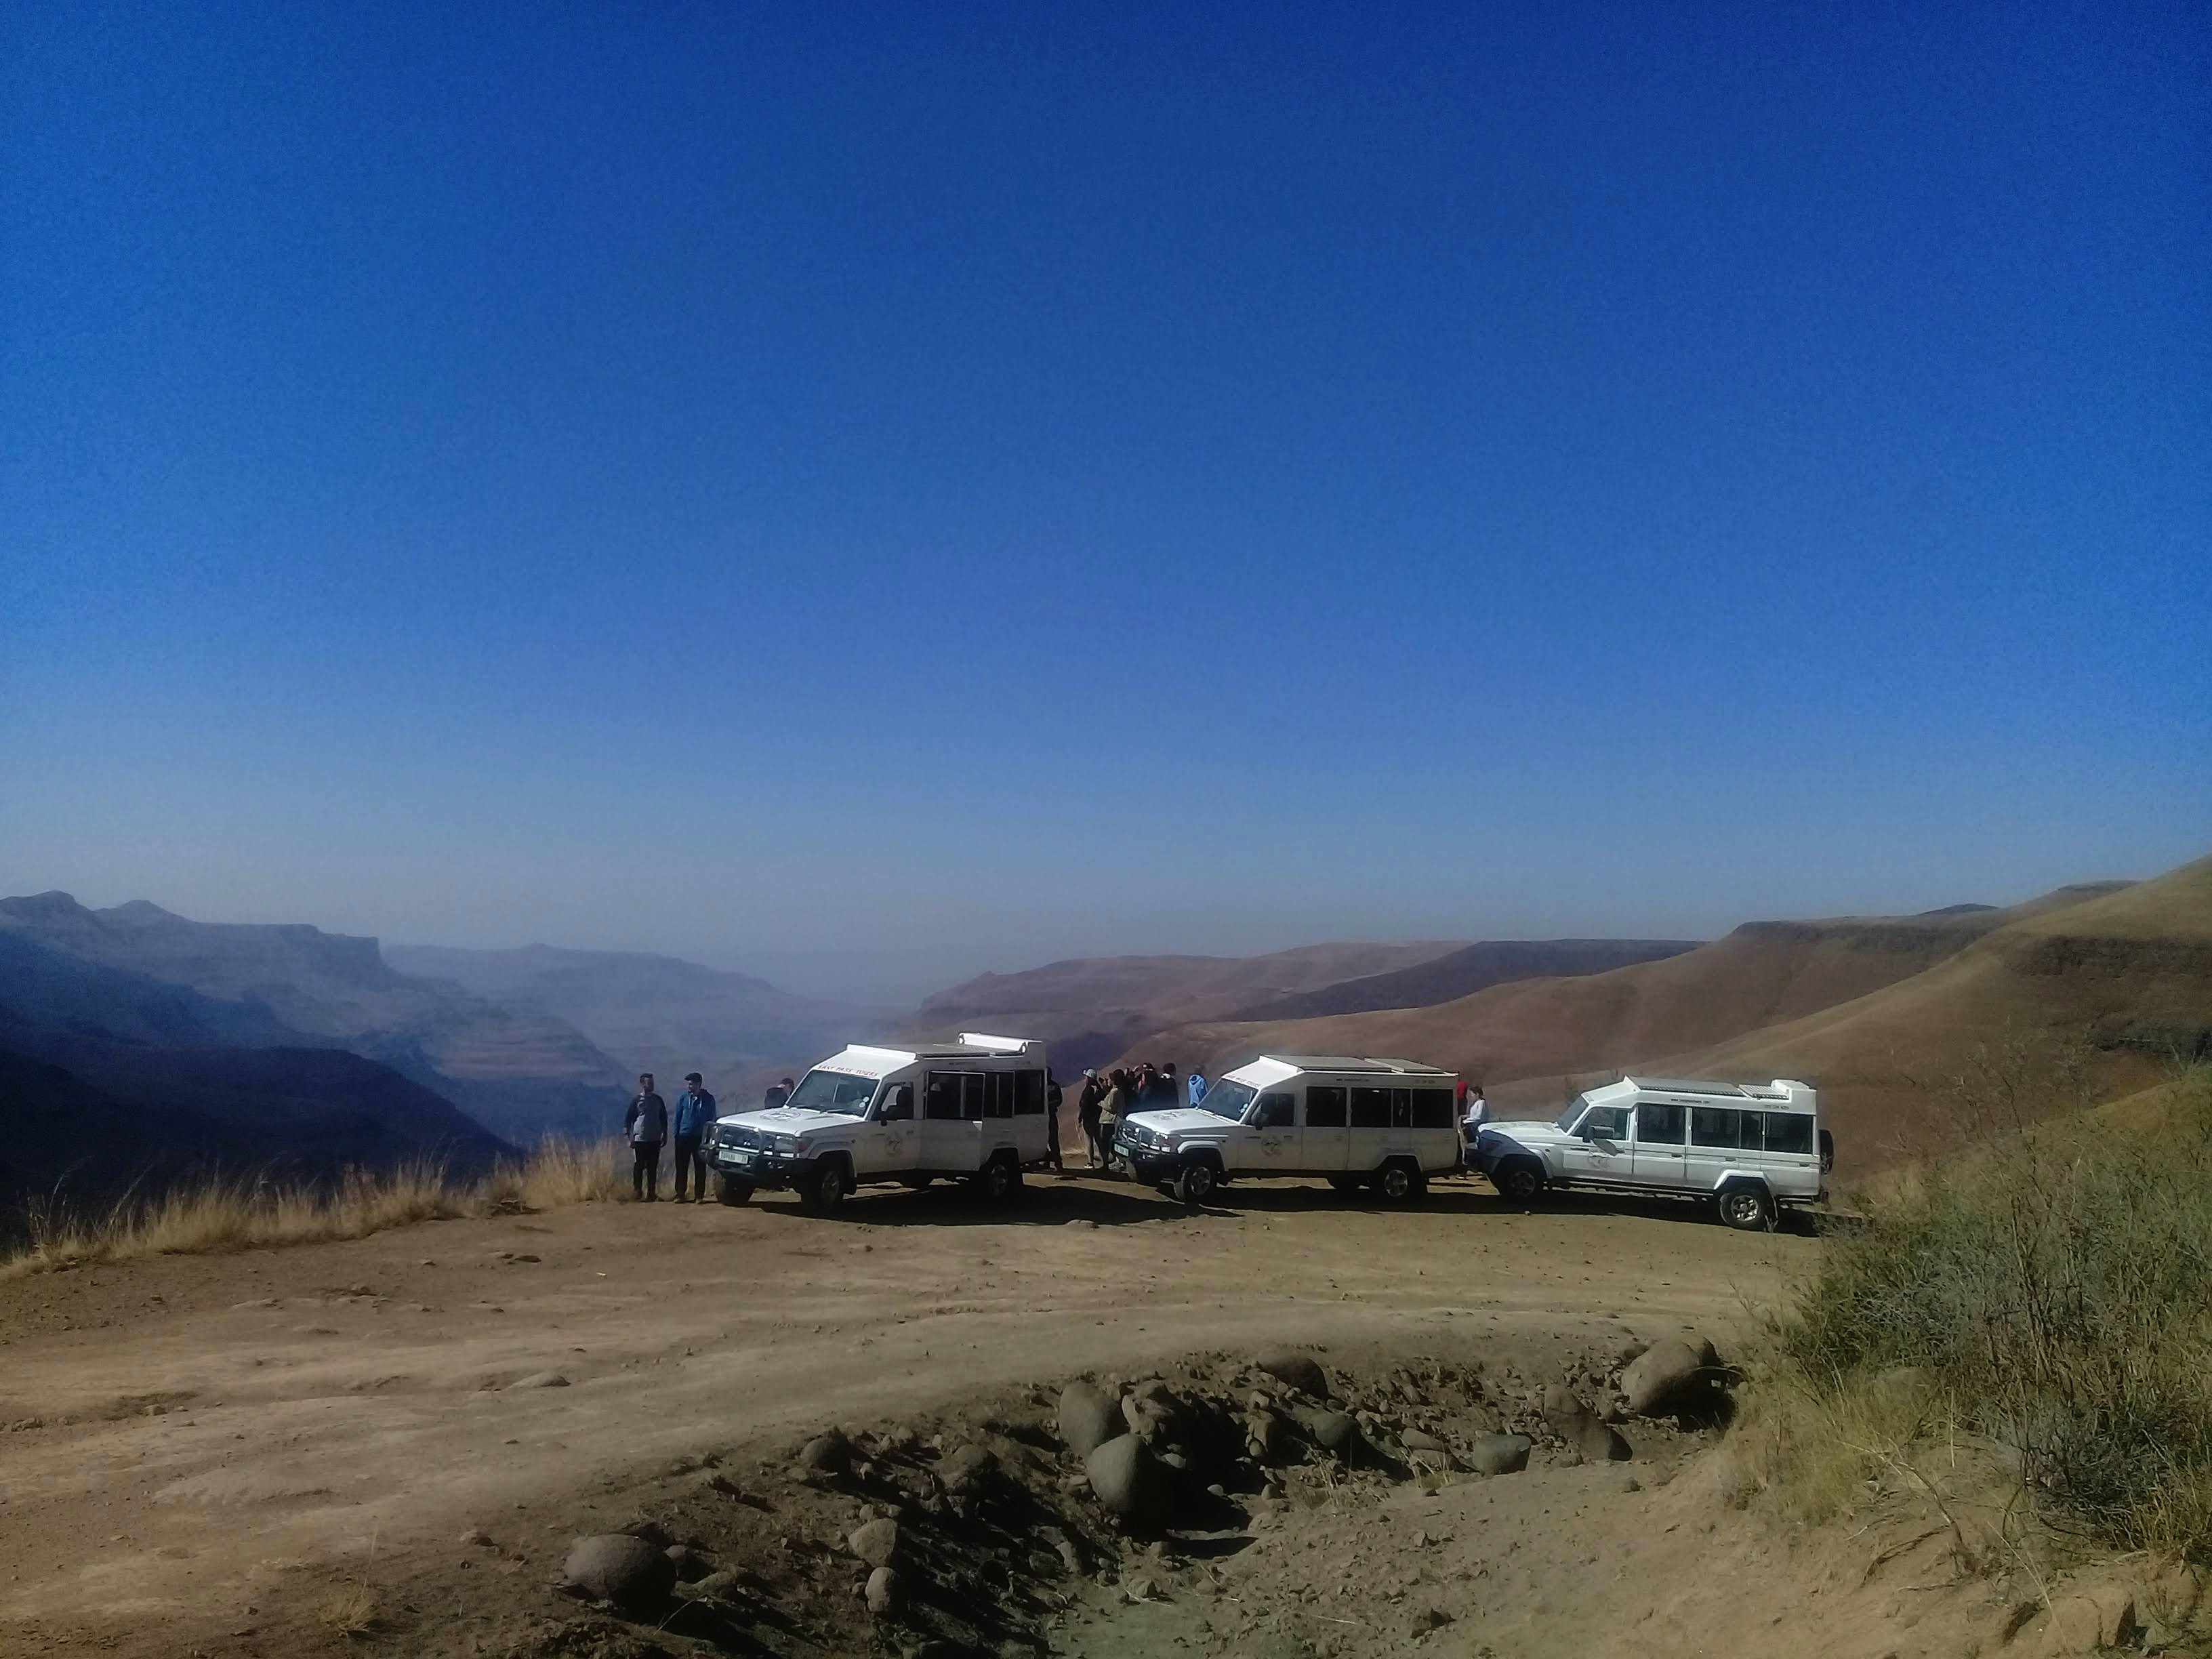 Three specialised 4x4 vehicles are parked on a dirt road, the passengers stand next to the vehicles and gaze out over the dramatic valley to dissappears into the horizon